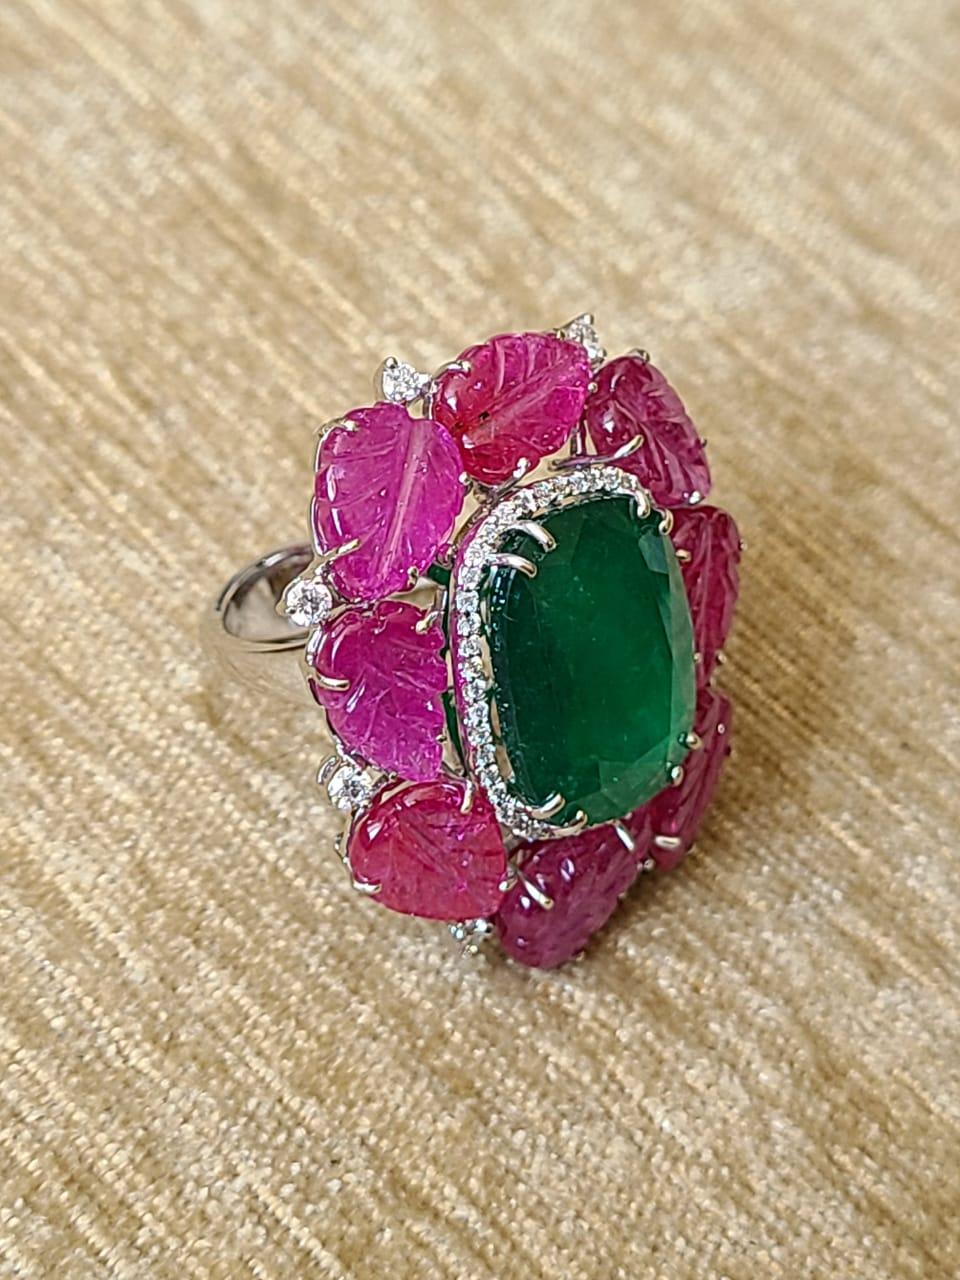 A very Beautiful & Bold Zambian Emerald & Mozambique Ruby Cocktail Ring set in 18K Gold & Diamonds. The Emerald, is completely natural, without any treatment. It is of Zambian origin and weighs 9.31 carats. The Rubies are also completely natural,